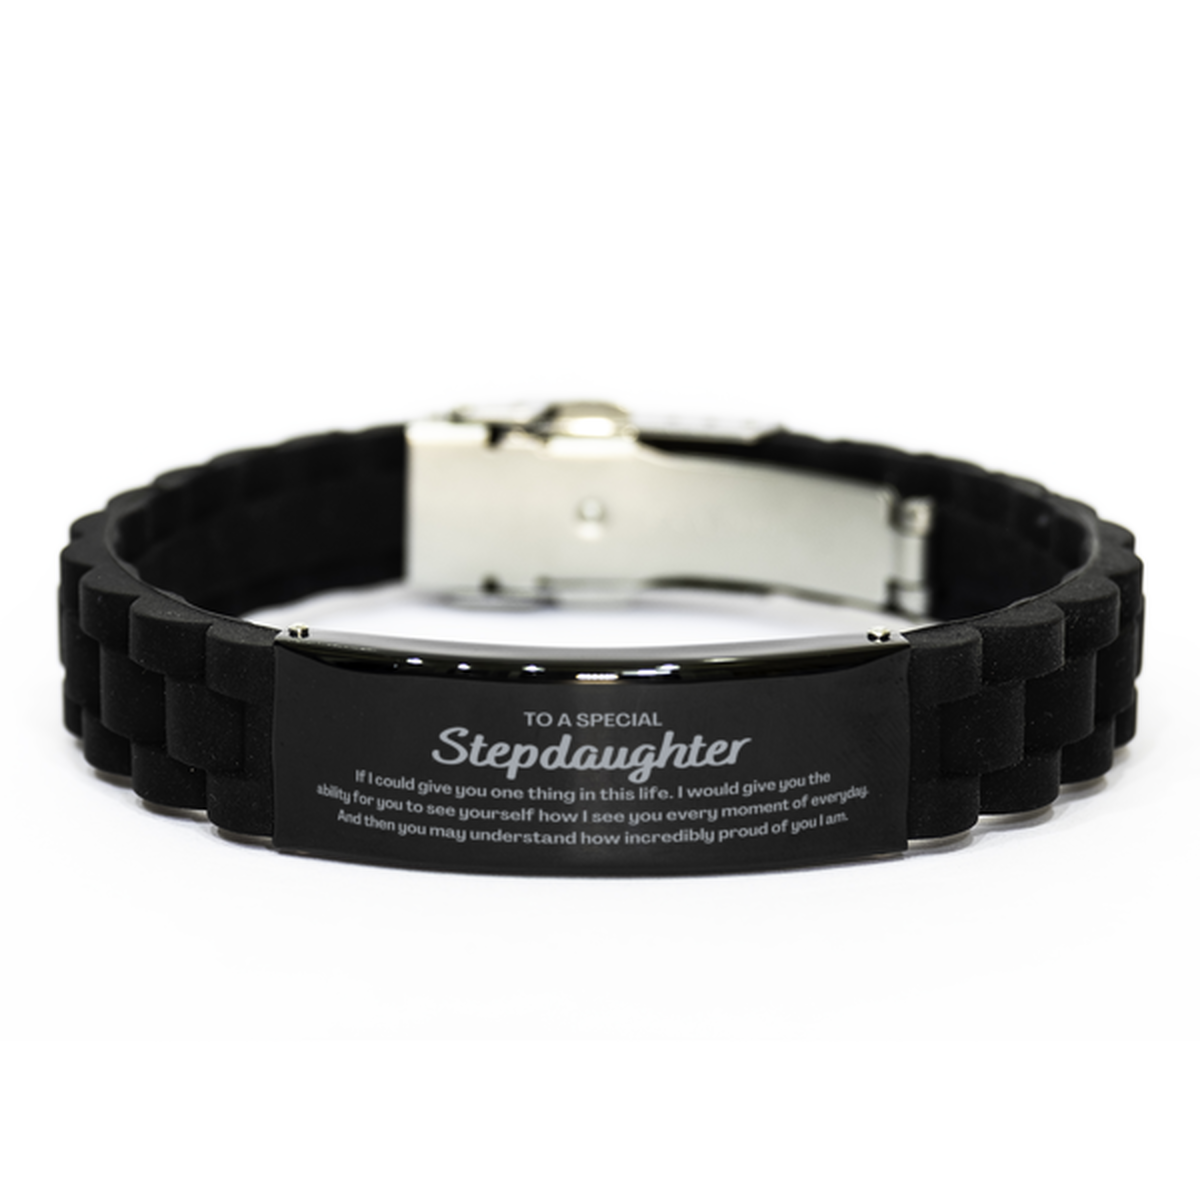 To My Stepdaughter Black Glidelock Clasp Bracelet, Gifts For Stepdaughter Engraved, Inspirational Gifts for Christmas Birthday, Epic Gifts for Stepdaughter To A Special Stepdaughter how incredibly proud of you I am